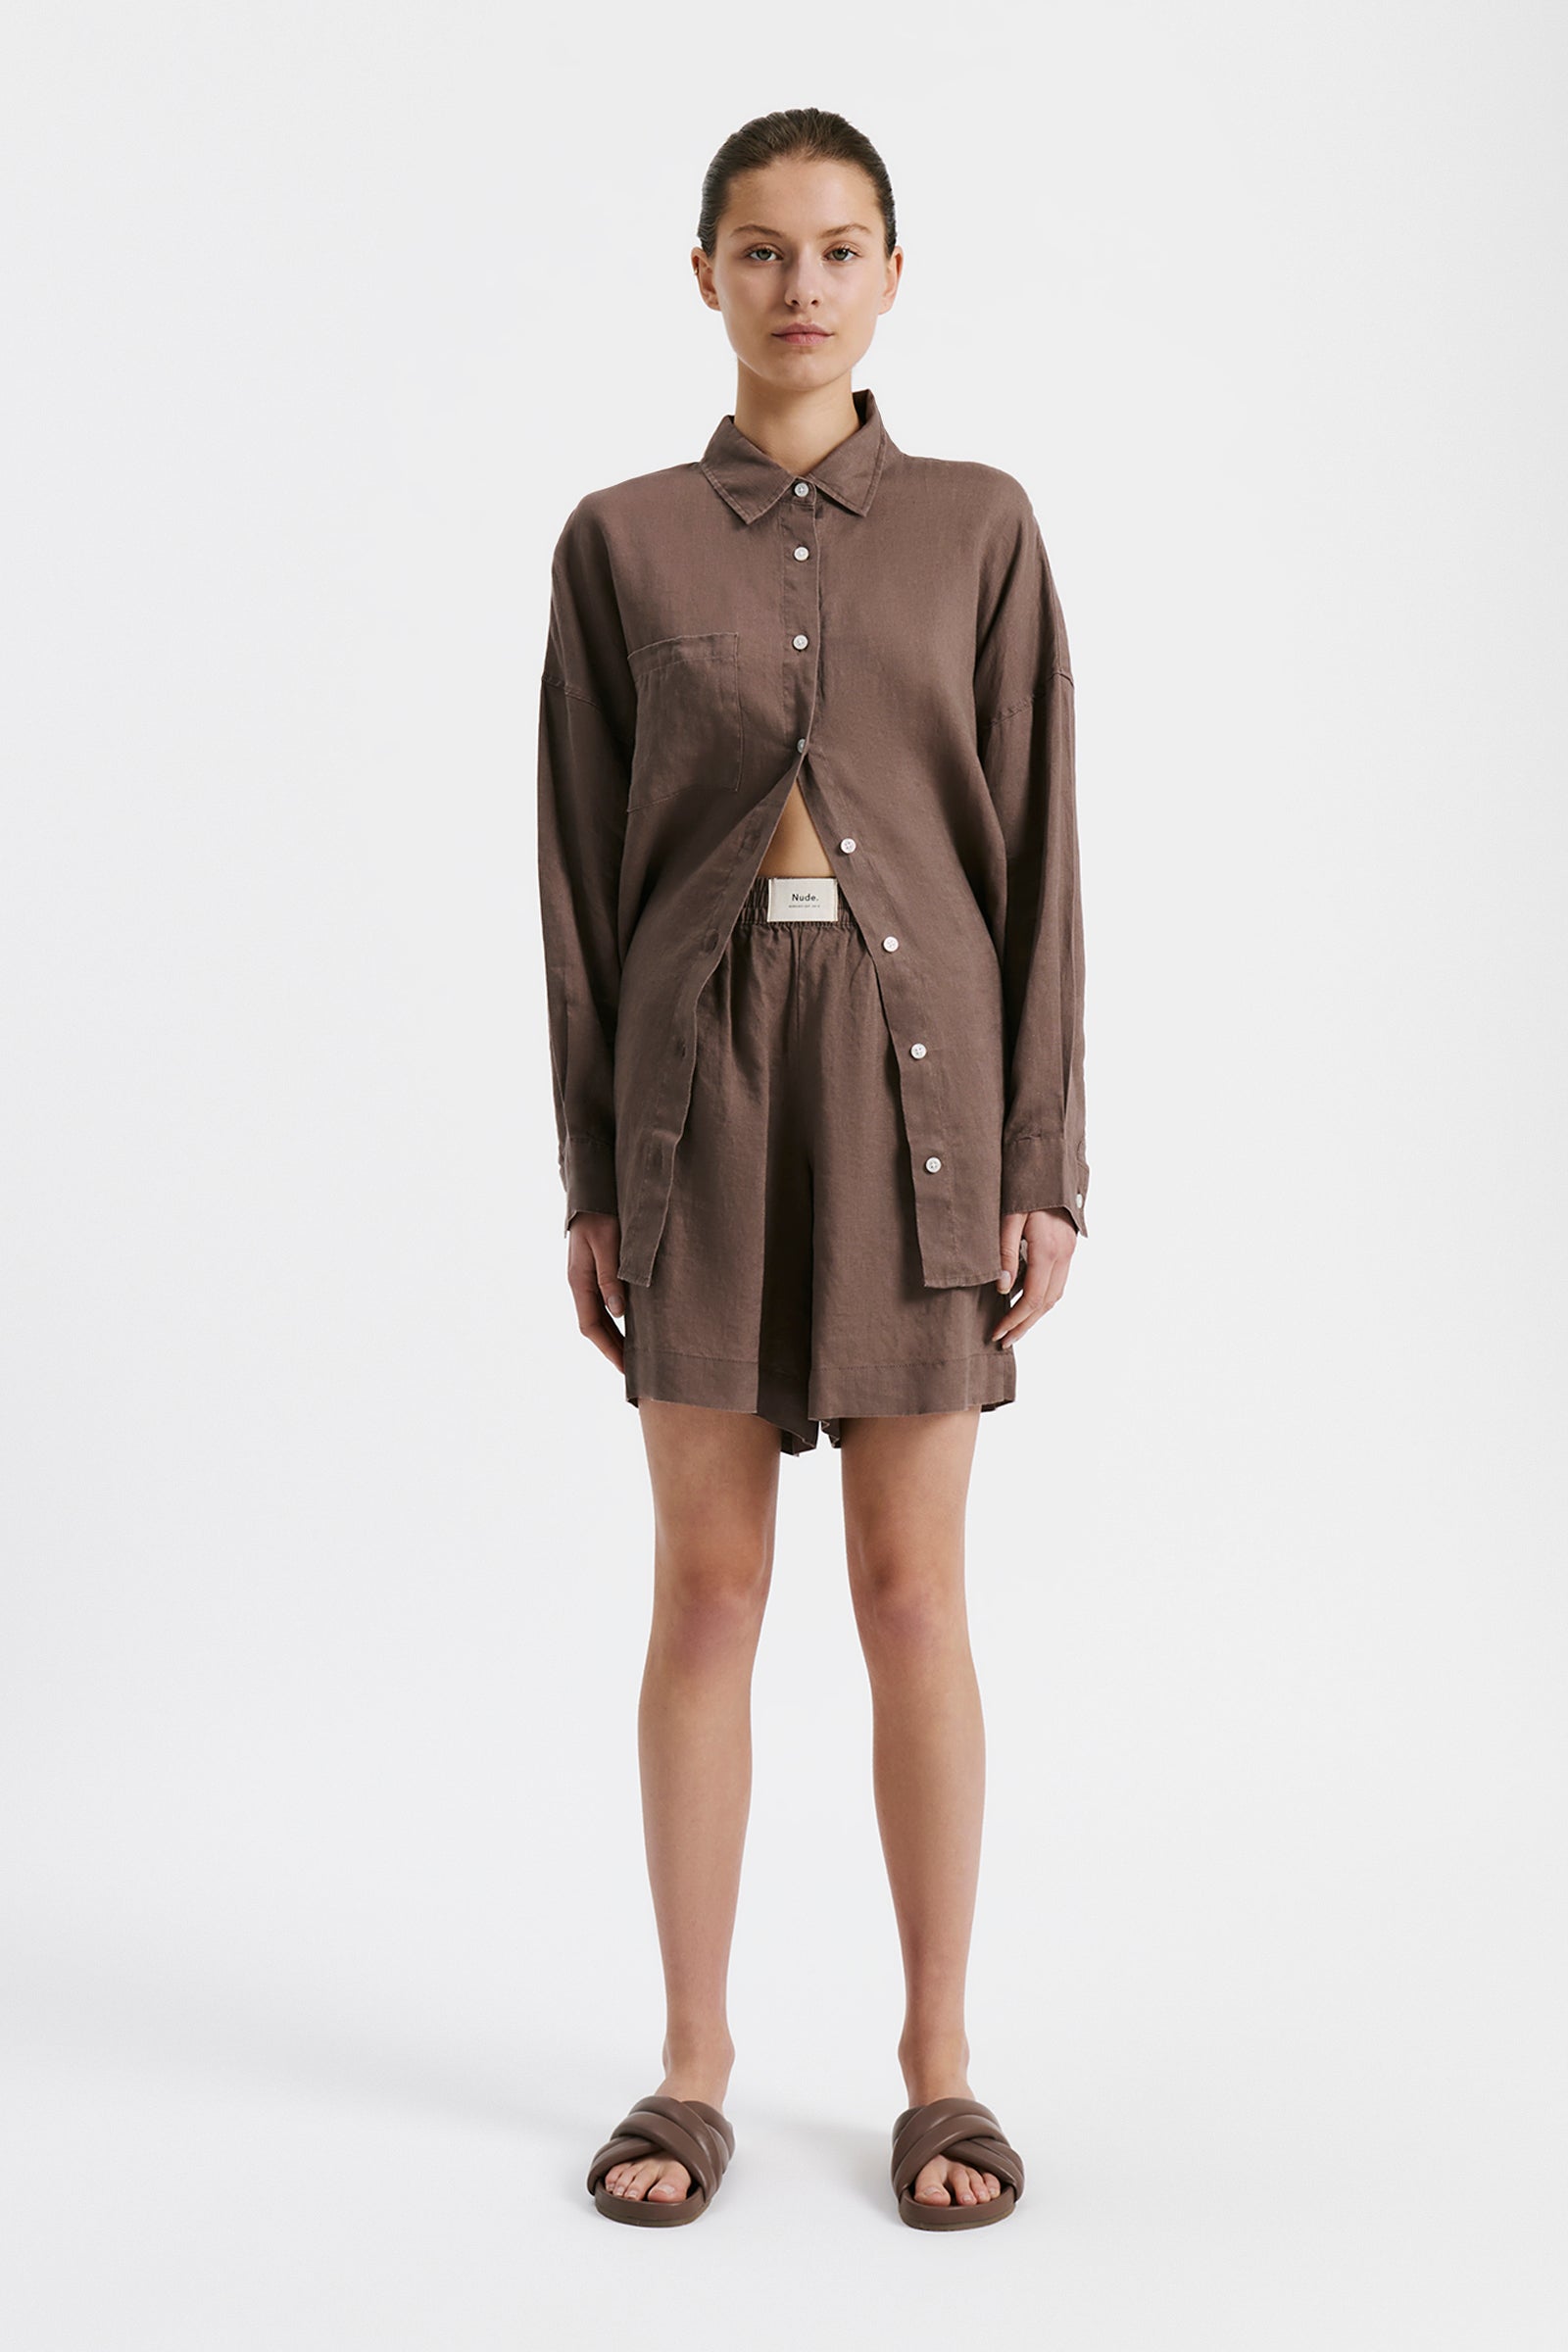 Nude Lucy Lounge Heritage Linen Shirt in Soot